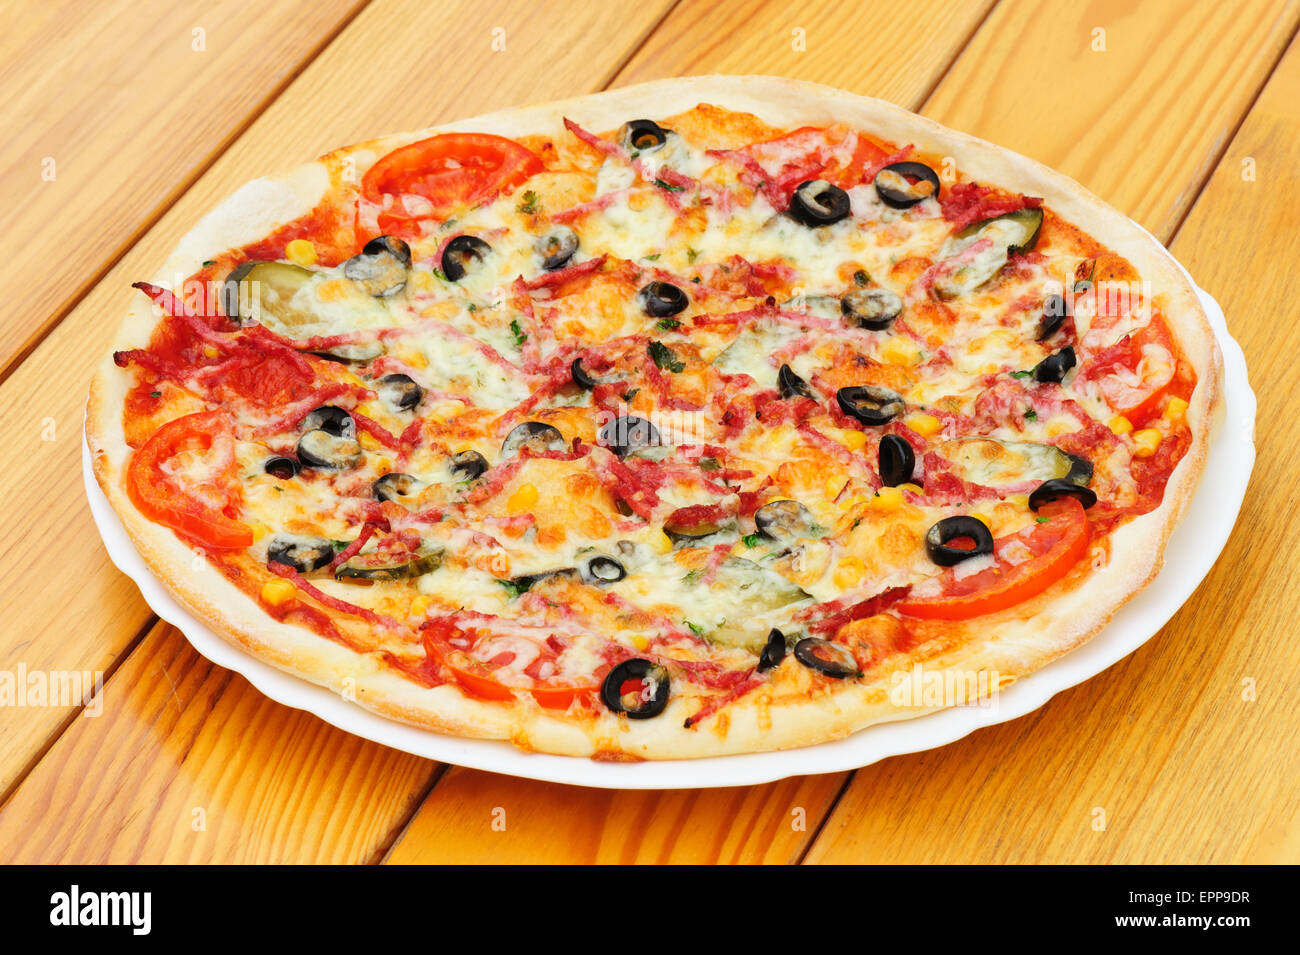 Pizza with pepperoni, black olives and corn Stock Photo